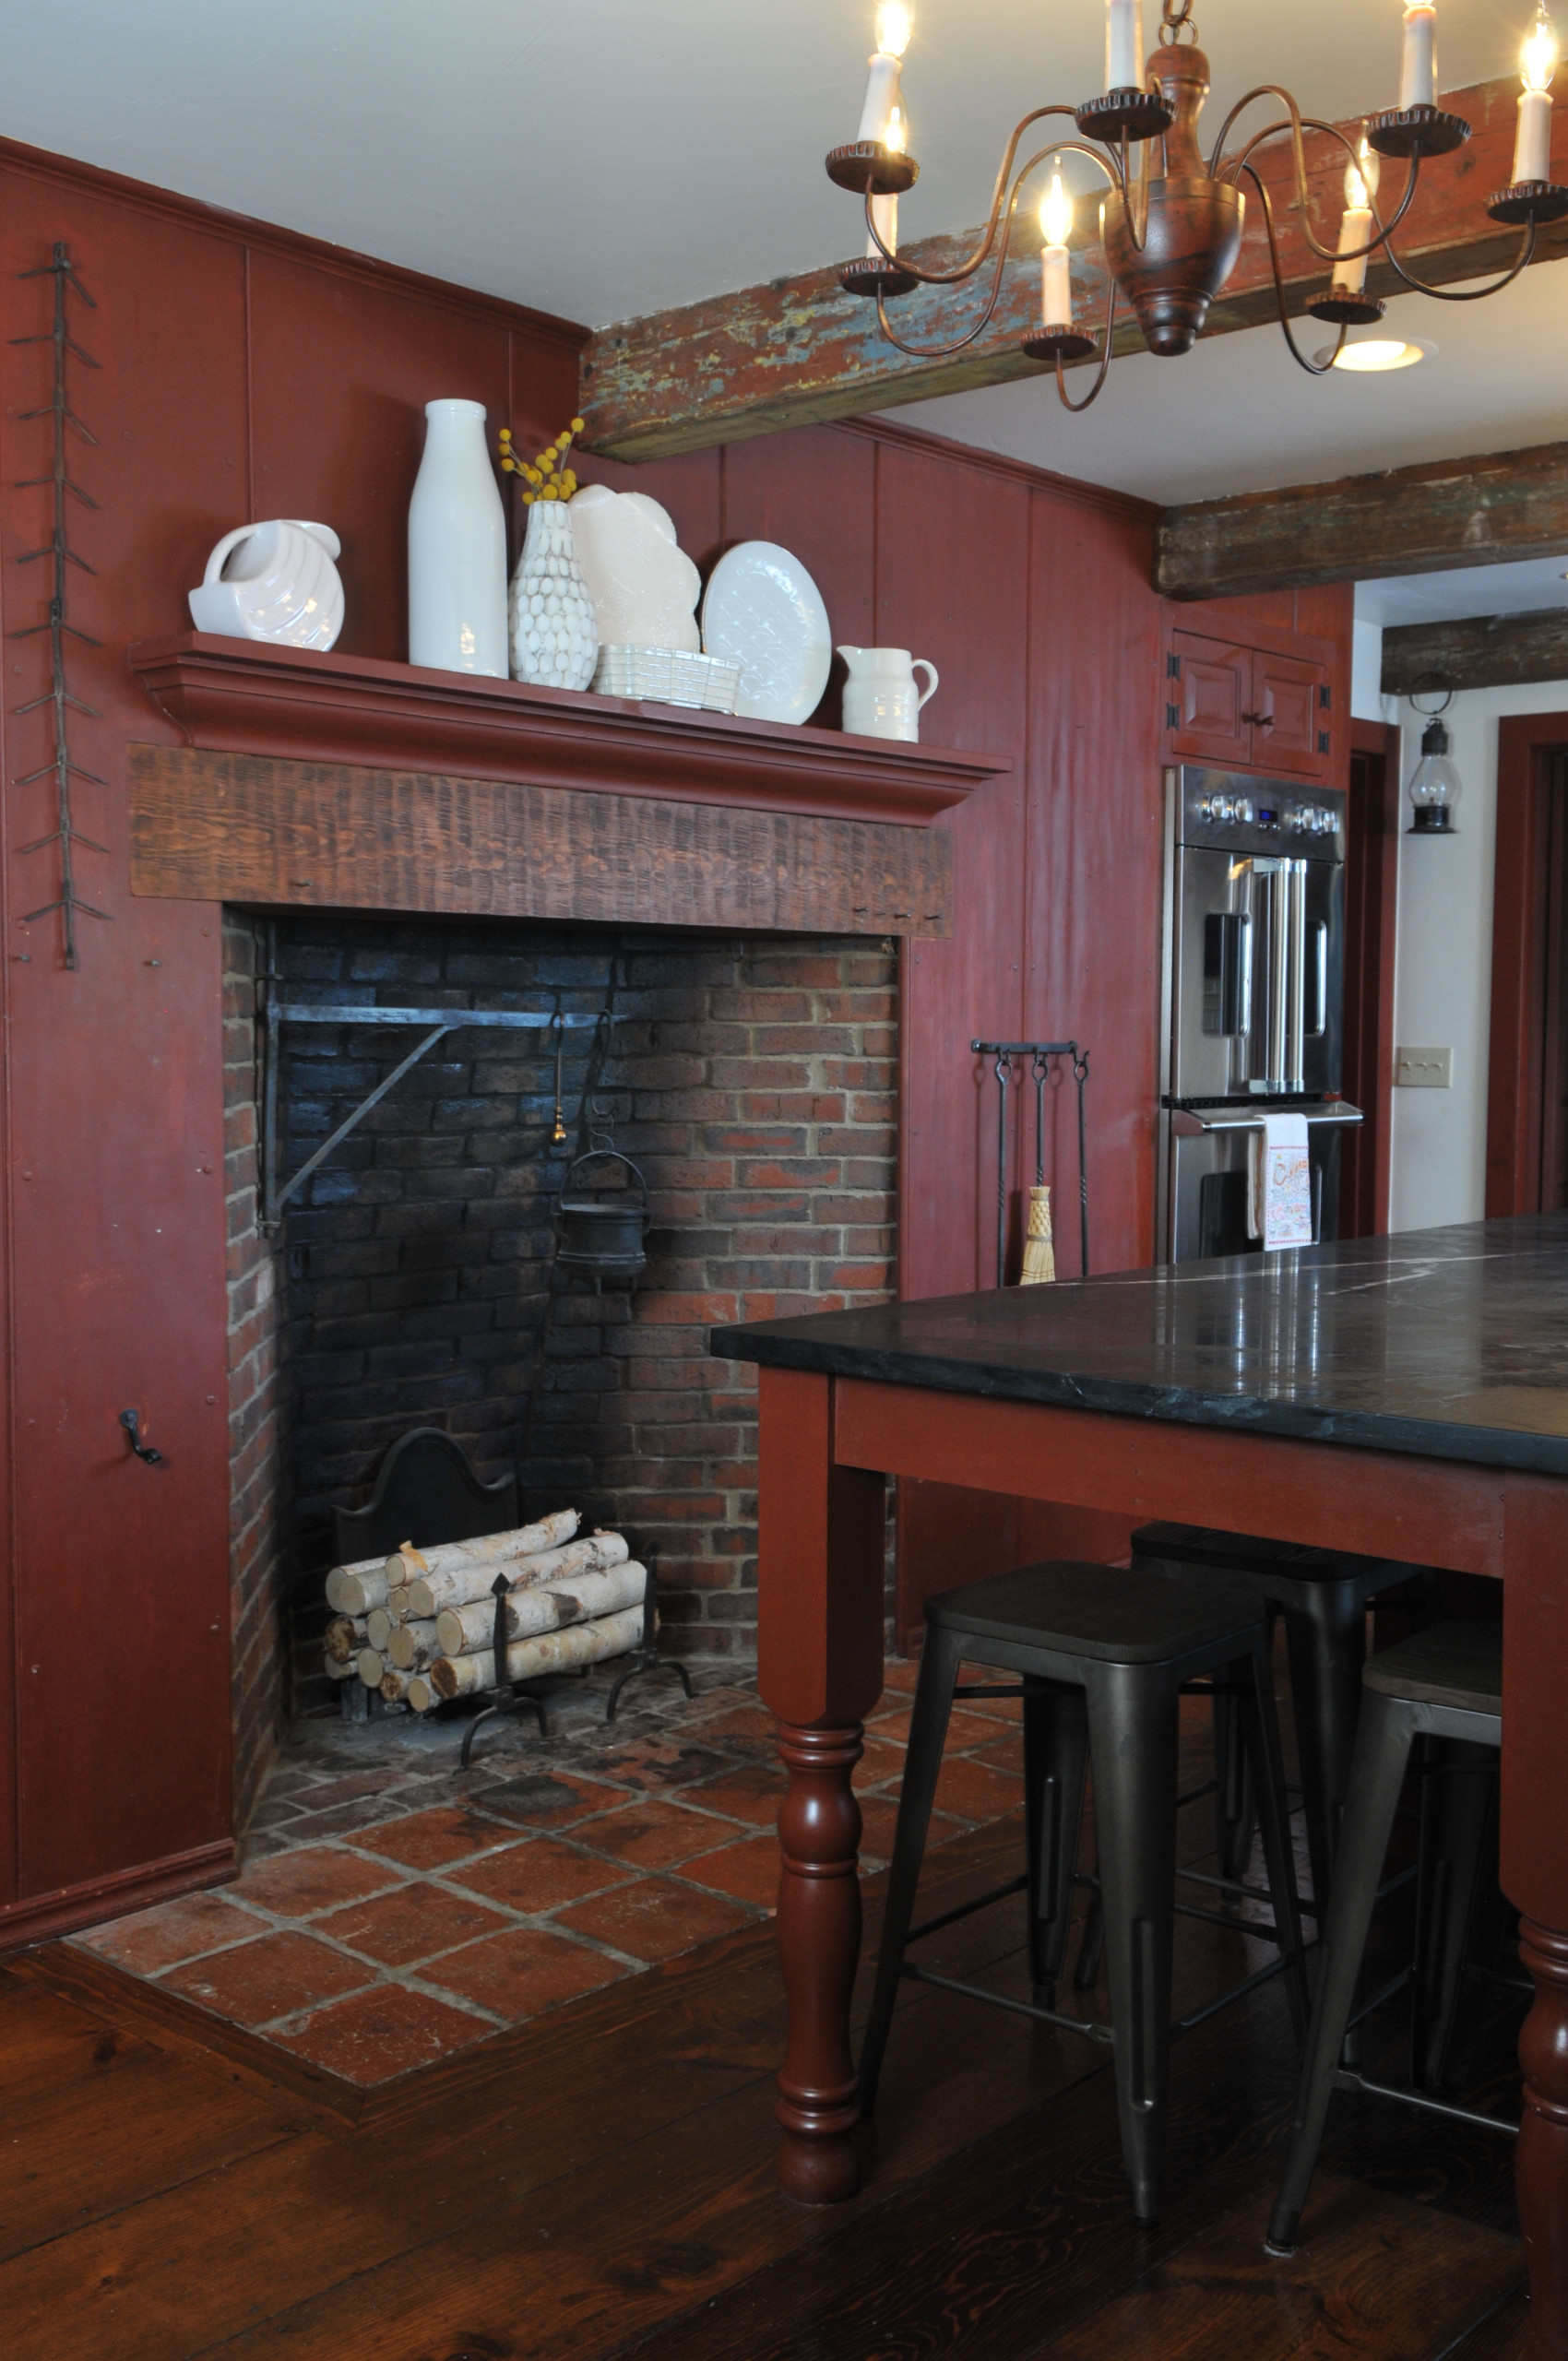 Colonial Kitchen